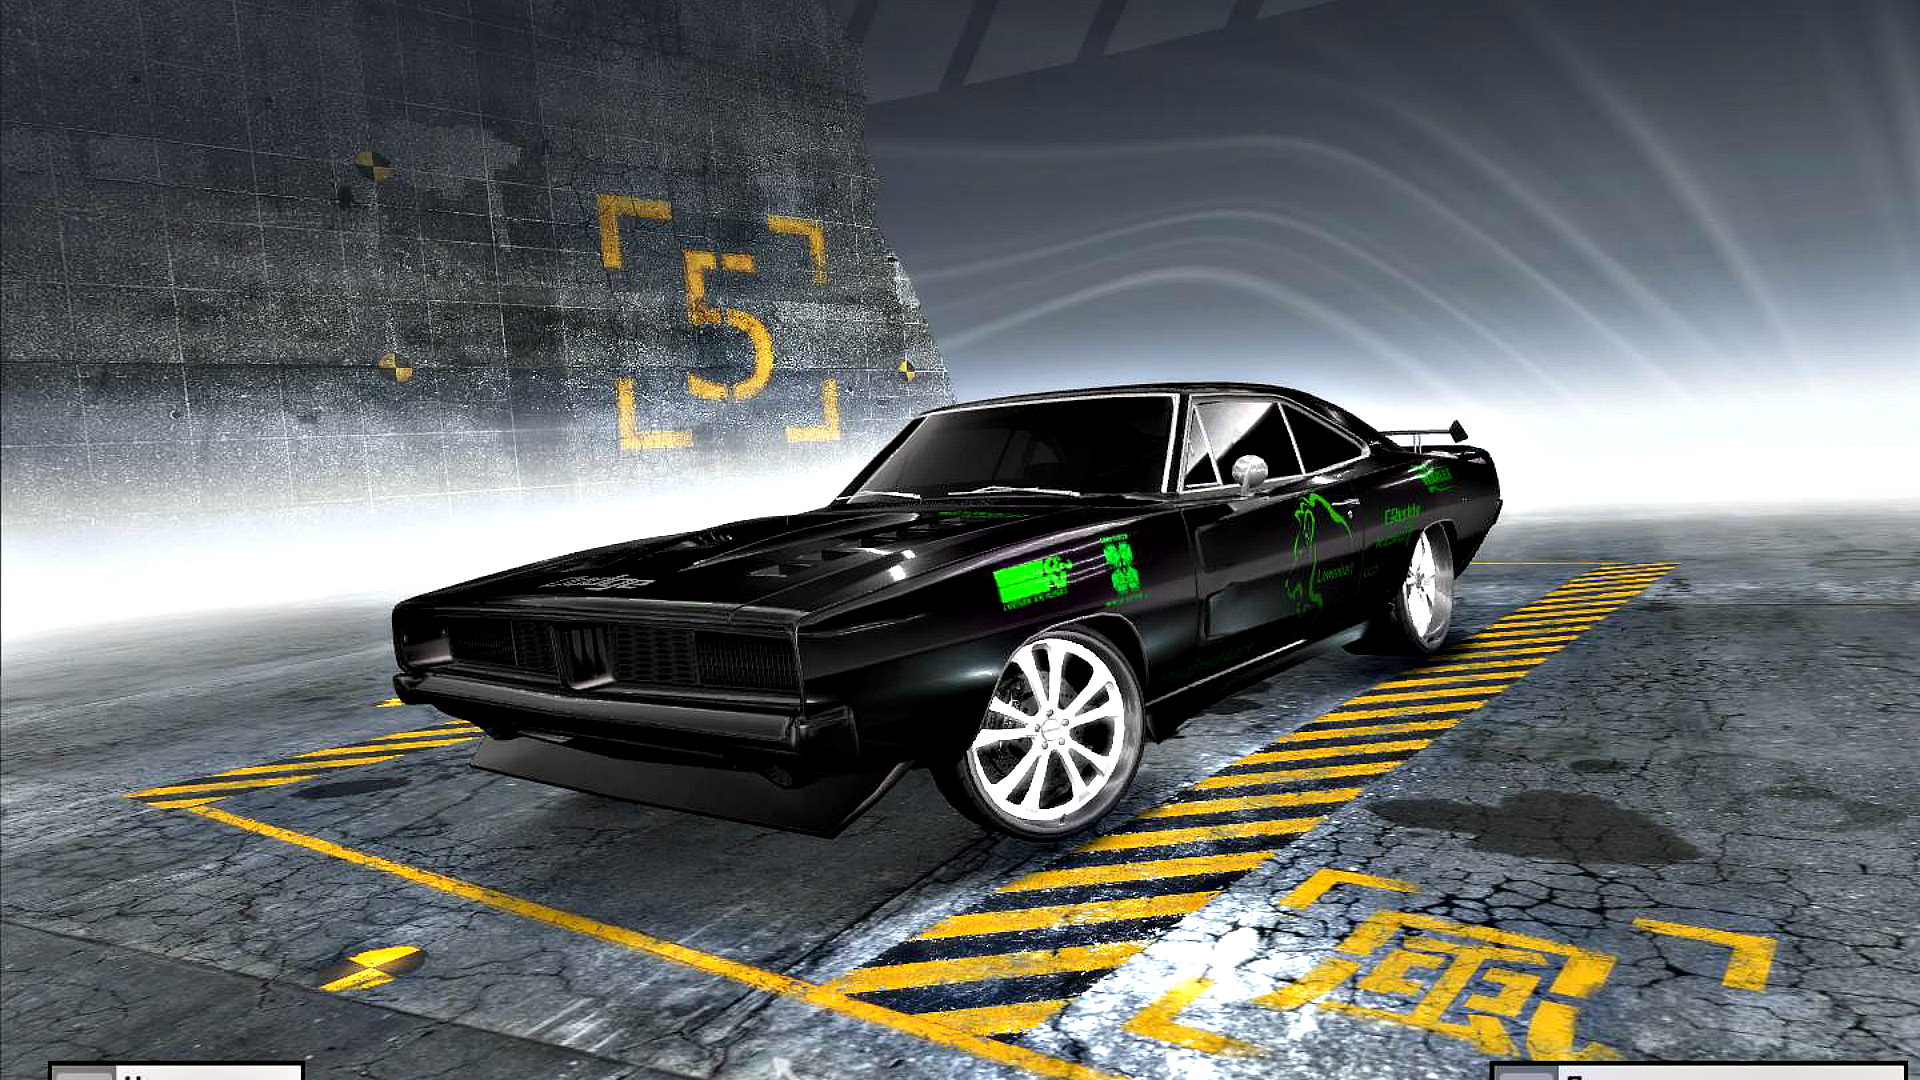 ProStreet, Charger, drag